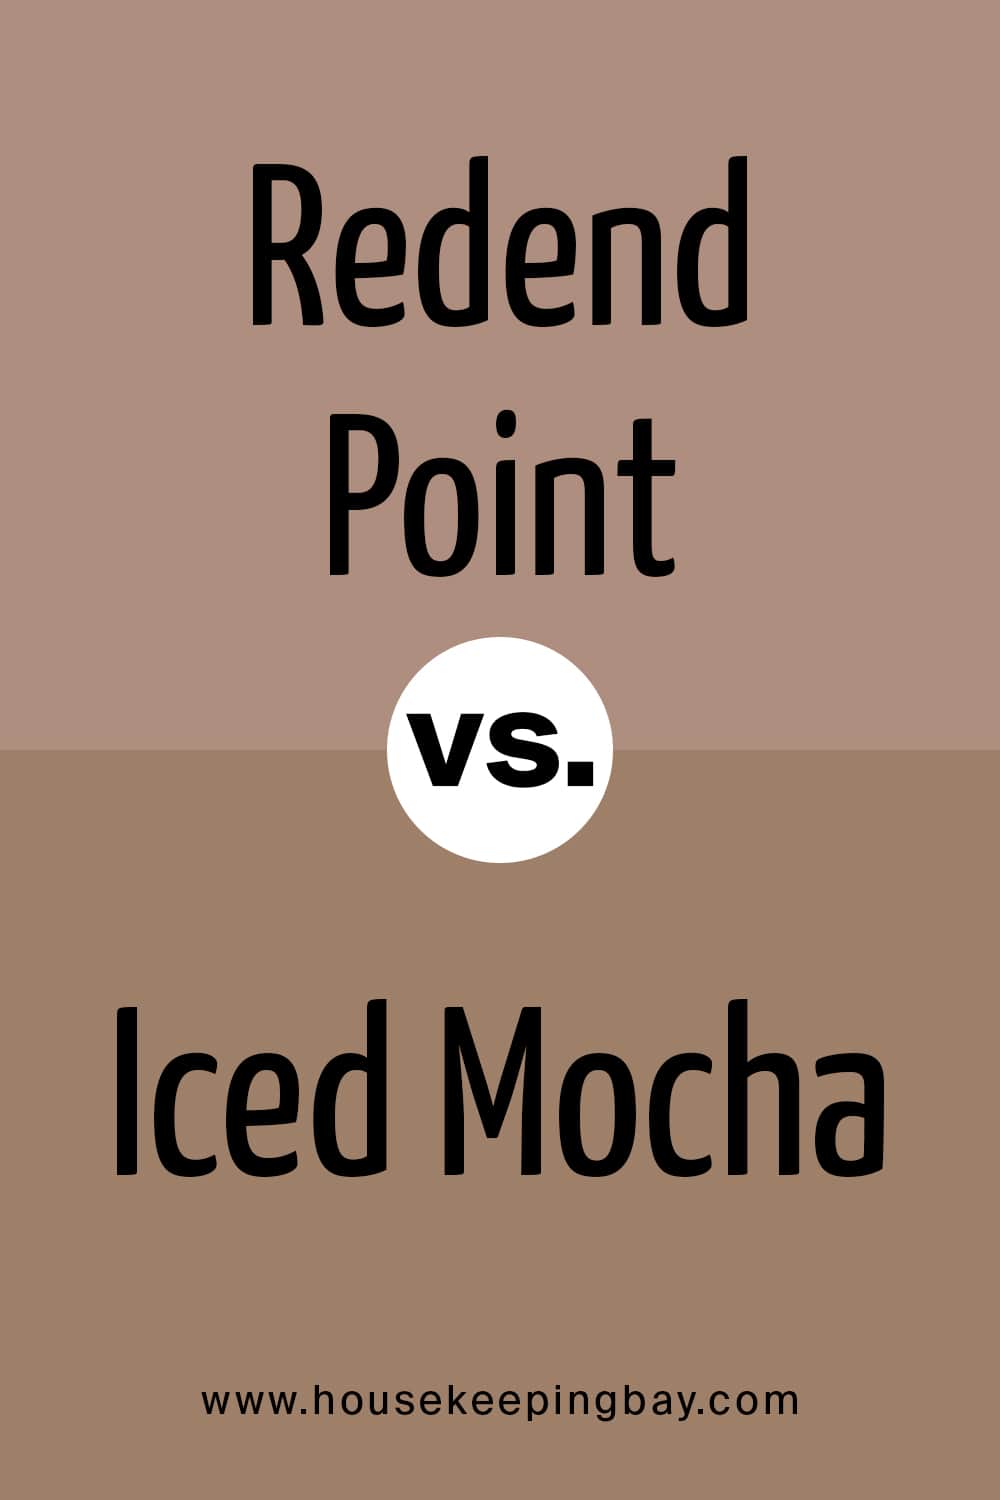 Redend Point VS Iced Mocha